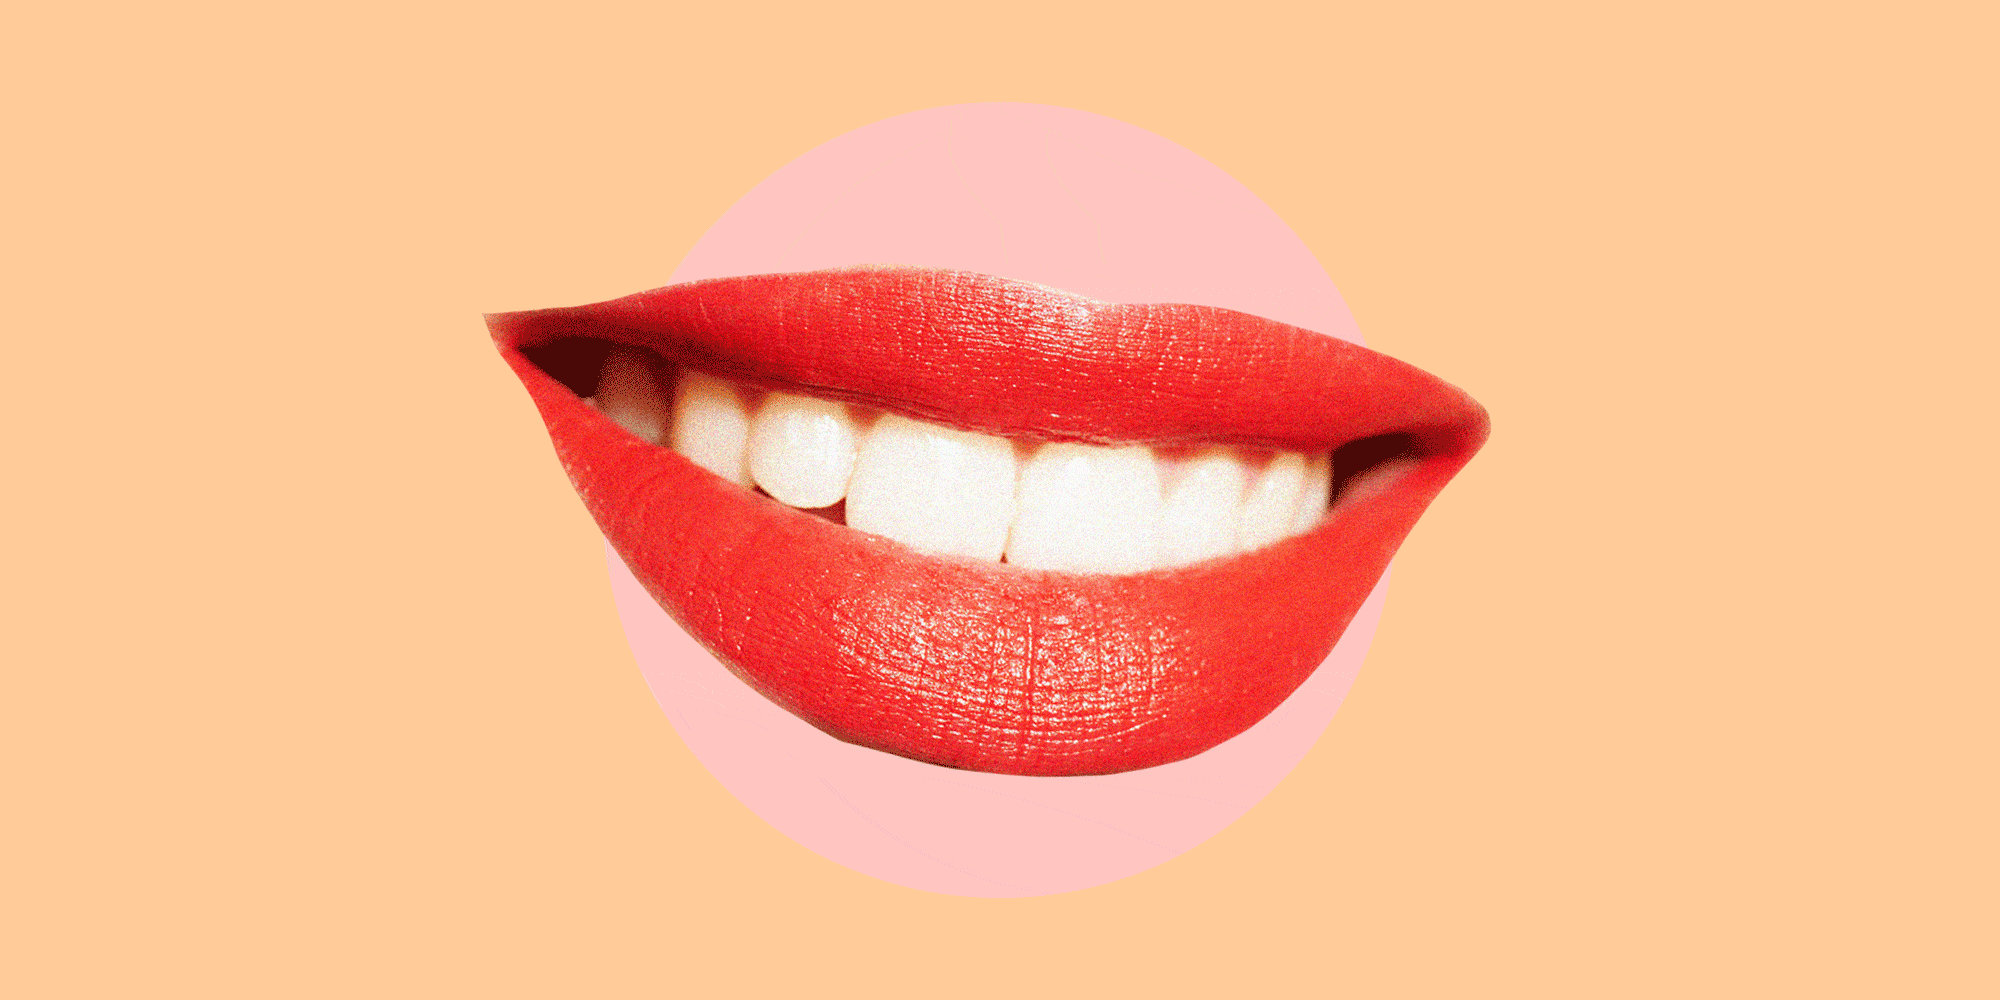 Teeth whitening: from strips to bleaching and at home kits, we review all your teeth whitening options